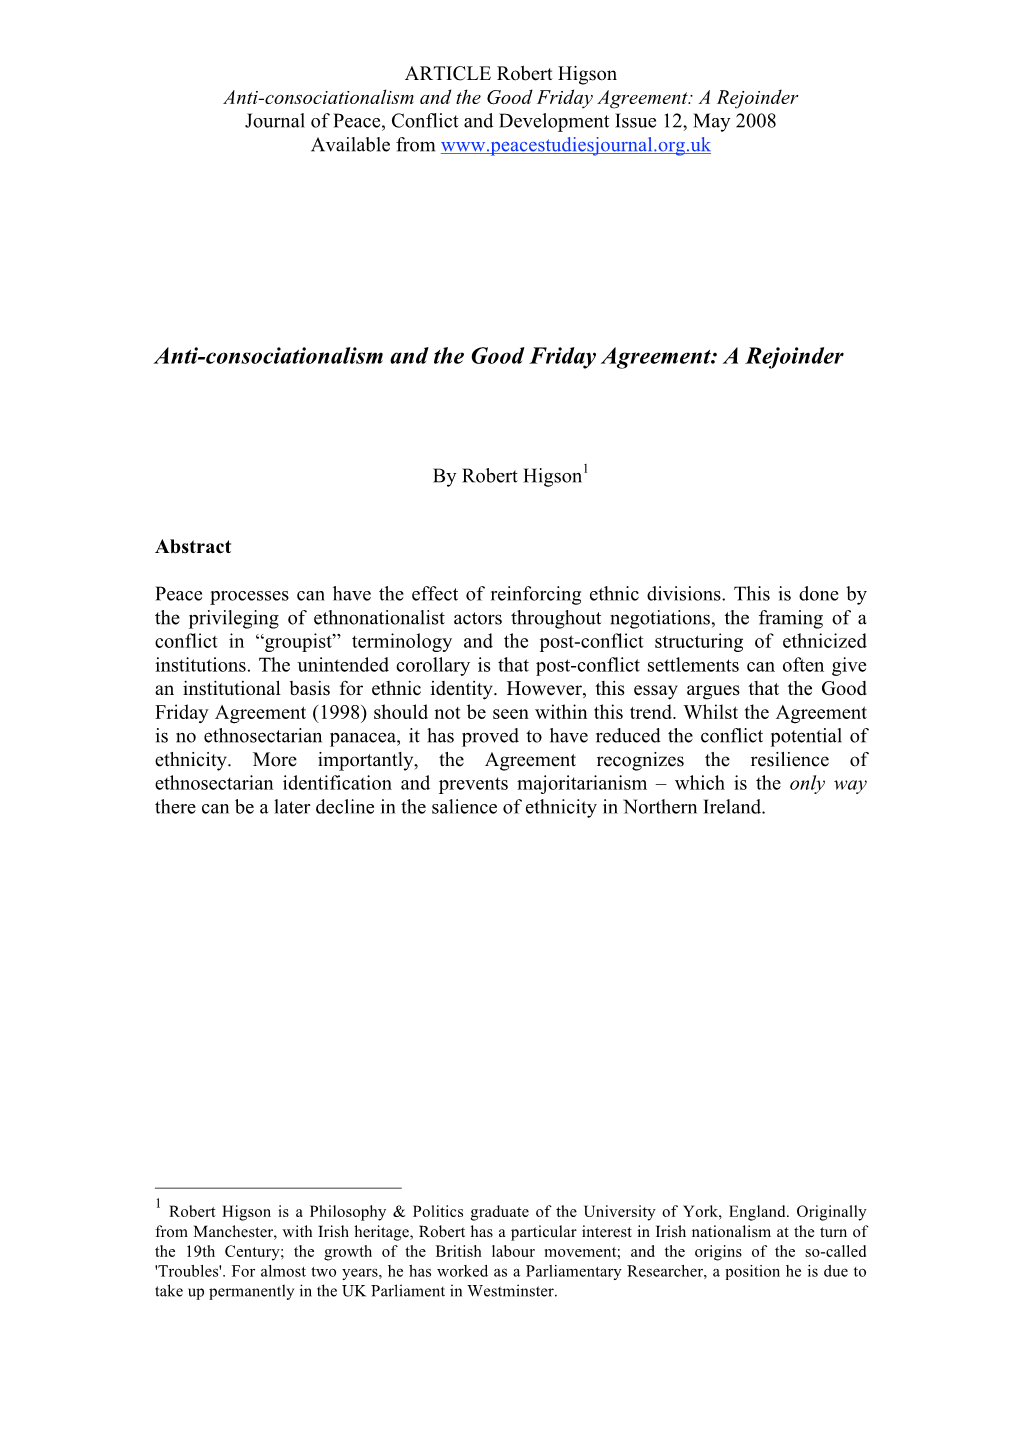 Anti-Consociationalism and the Good Friday Agreement, a Rejoinder